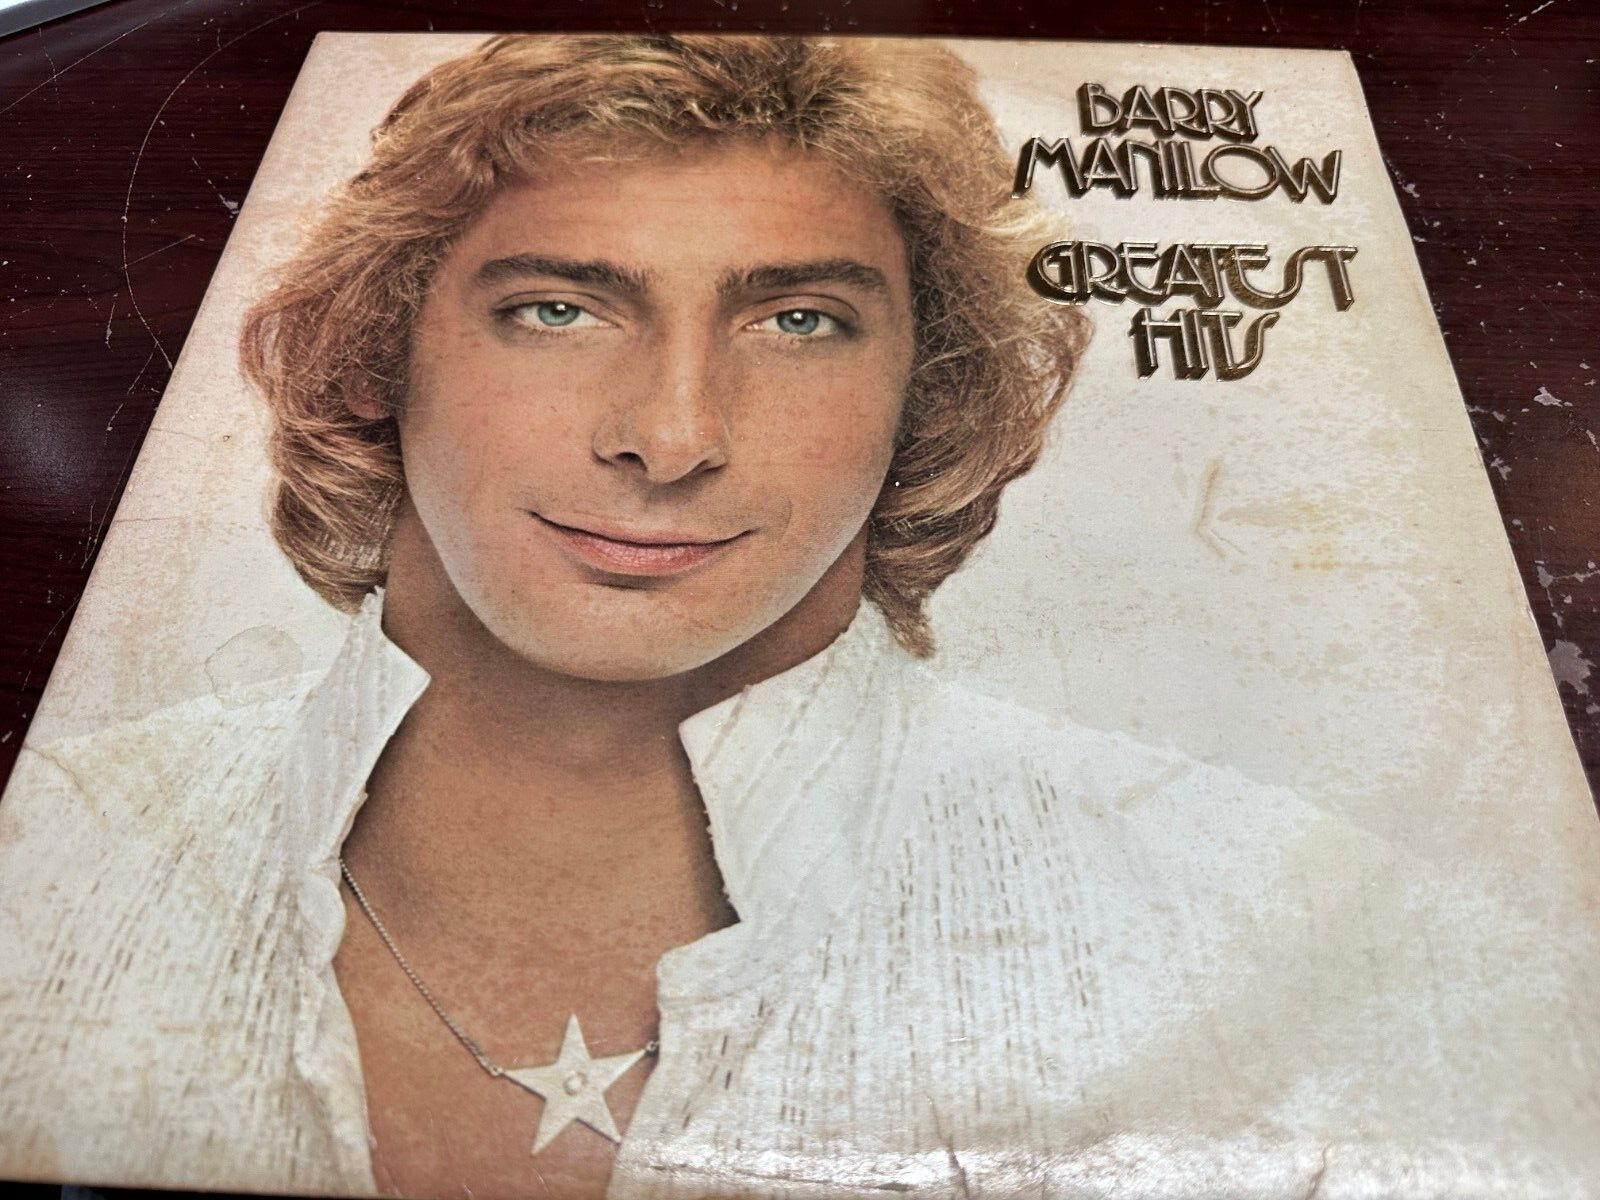 Barry Manilow ‎– The Very Best Of Barry Manilow Greatest Hits LP